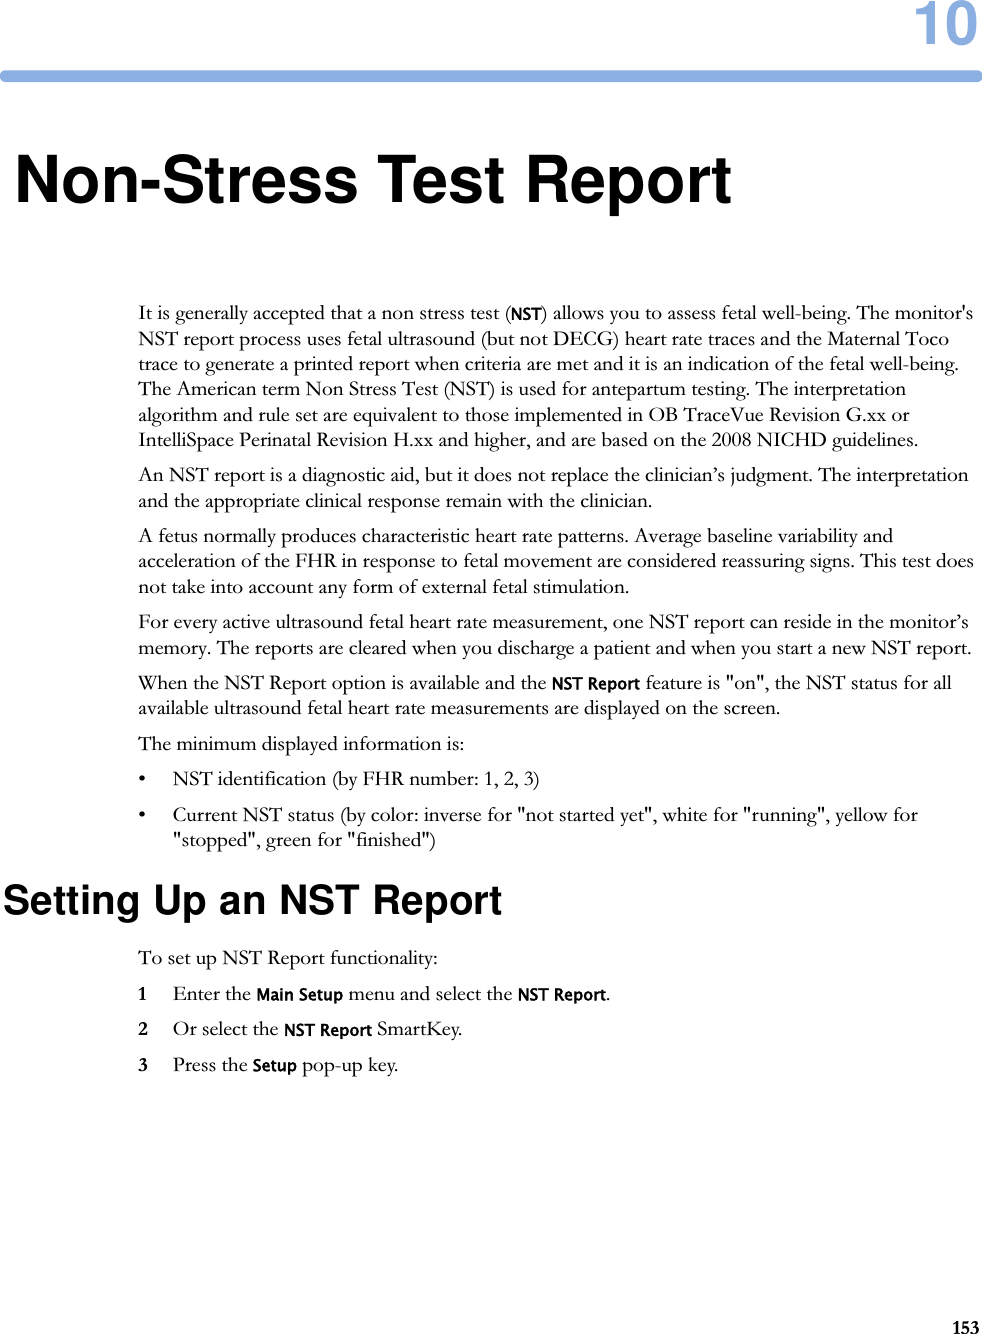 1015310Non-Stress Test ReportIt is generally accepted that a non stress test (NST) allows you to assess fetal well-being. The monitor&apos;s NST report process uses fetal ultrasound (but not DECG) heart rate traces and the Maternal Toco trace to generate a printed report when criteria are met and it is an indication of the fetal well-being. The American term Non Stress Test (NST) is used for antepartum testing. The interpretation algorithm and rule set are equivalent to those implemented in OB TraceVue Revision G.xx or IntelliSpace Perinatal Revision H.xx and higher, and are based on the 2008 NICHD guidelines.An NST report is a diagnostic aid, but it does not replace the clinician’s judgment. The interpretation and the appropriate clinical response remain with the clinician.A fetus normally produces characteristic heart rate patterns. Average baseline variability and acceleration of the FHR in response to fetal movement are considered reassuring signs. This test does not take into account any form of external fetal stimulation.For every active ultrasound fetal heart rate measurement, one NST report can reside in the monitor’s memory. The reports are cleared when you discharge a patient and when you start a new NST report.When the NST Report option is available and the NST Report feature is &quot;on&quot;, the NST status for all available ultrasound fetal heart rate measurements are displayed on the screen.The minimum displayed information is:• NST identification (by FHR number: 1, 2, 3)• Current NST status (by color: inverse for &quot;not started yet&quot;, white for &quot;running&quot;, yellow for &quot;stopped&quot;, green for &quot;finished&quot;)Setting Up an NST ReportTo set up NST Report functionality:1Enter the Main Setup menu and select the NST Report.2Or select the NST Report SmartKey.3Press the Setup pop-up key.